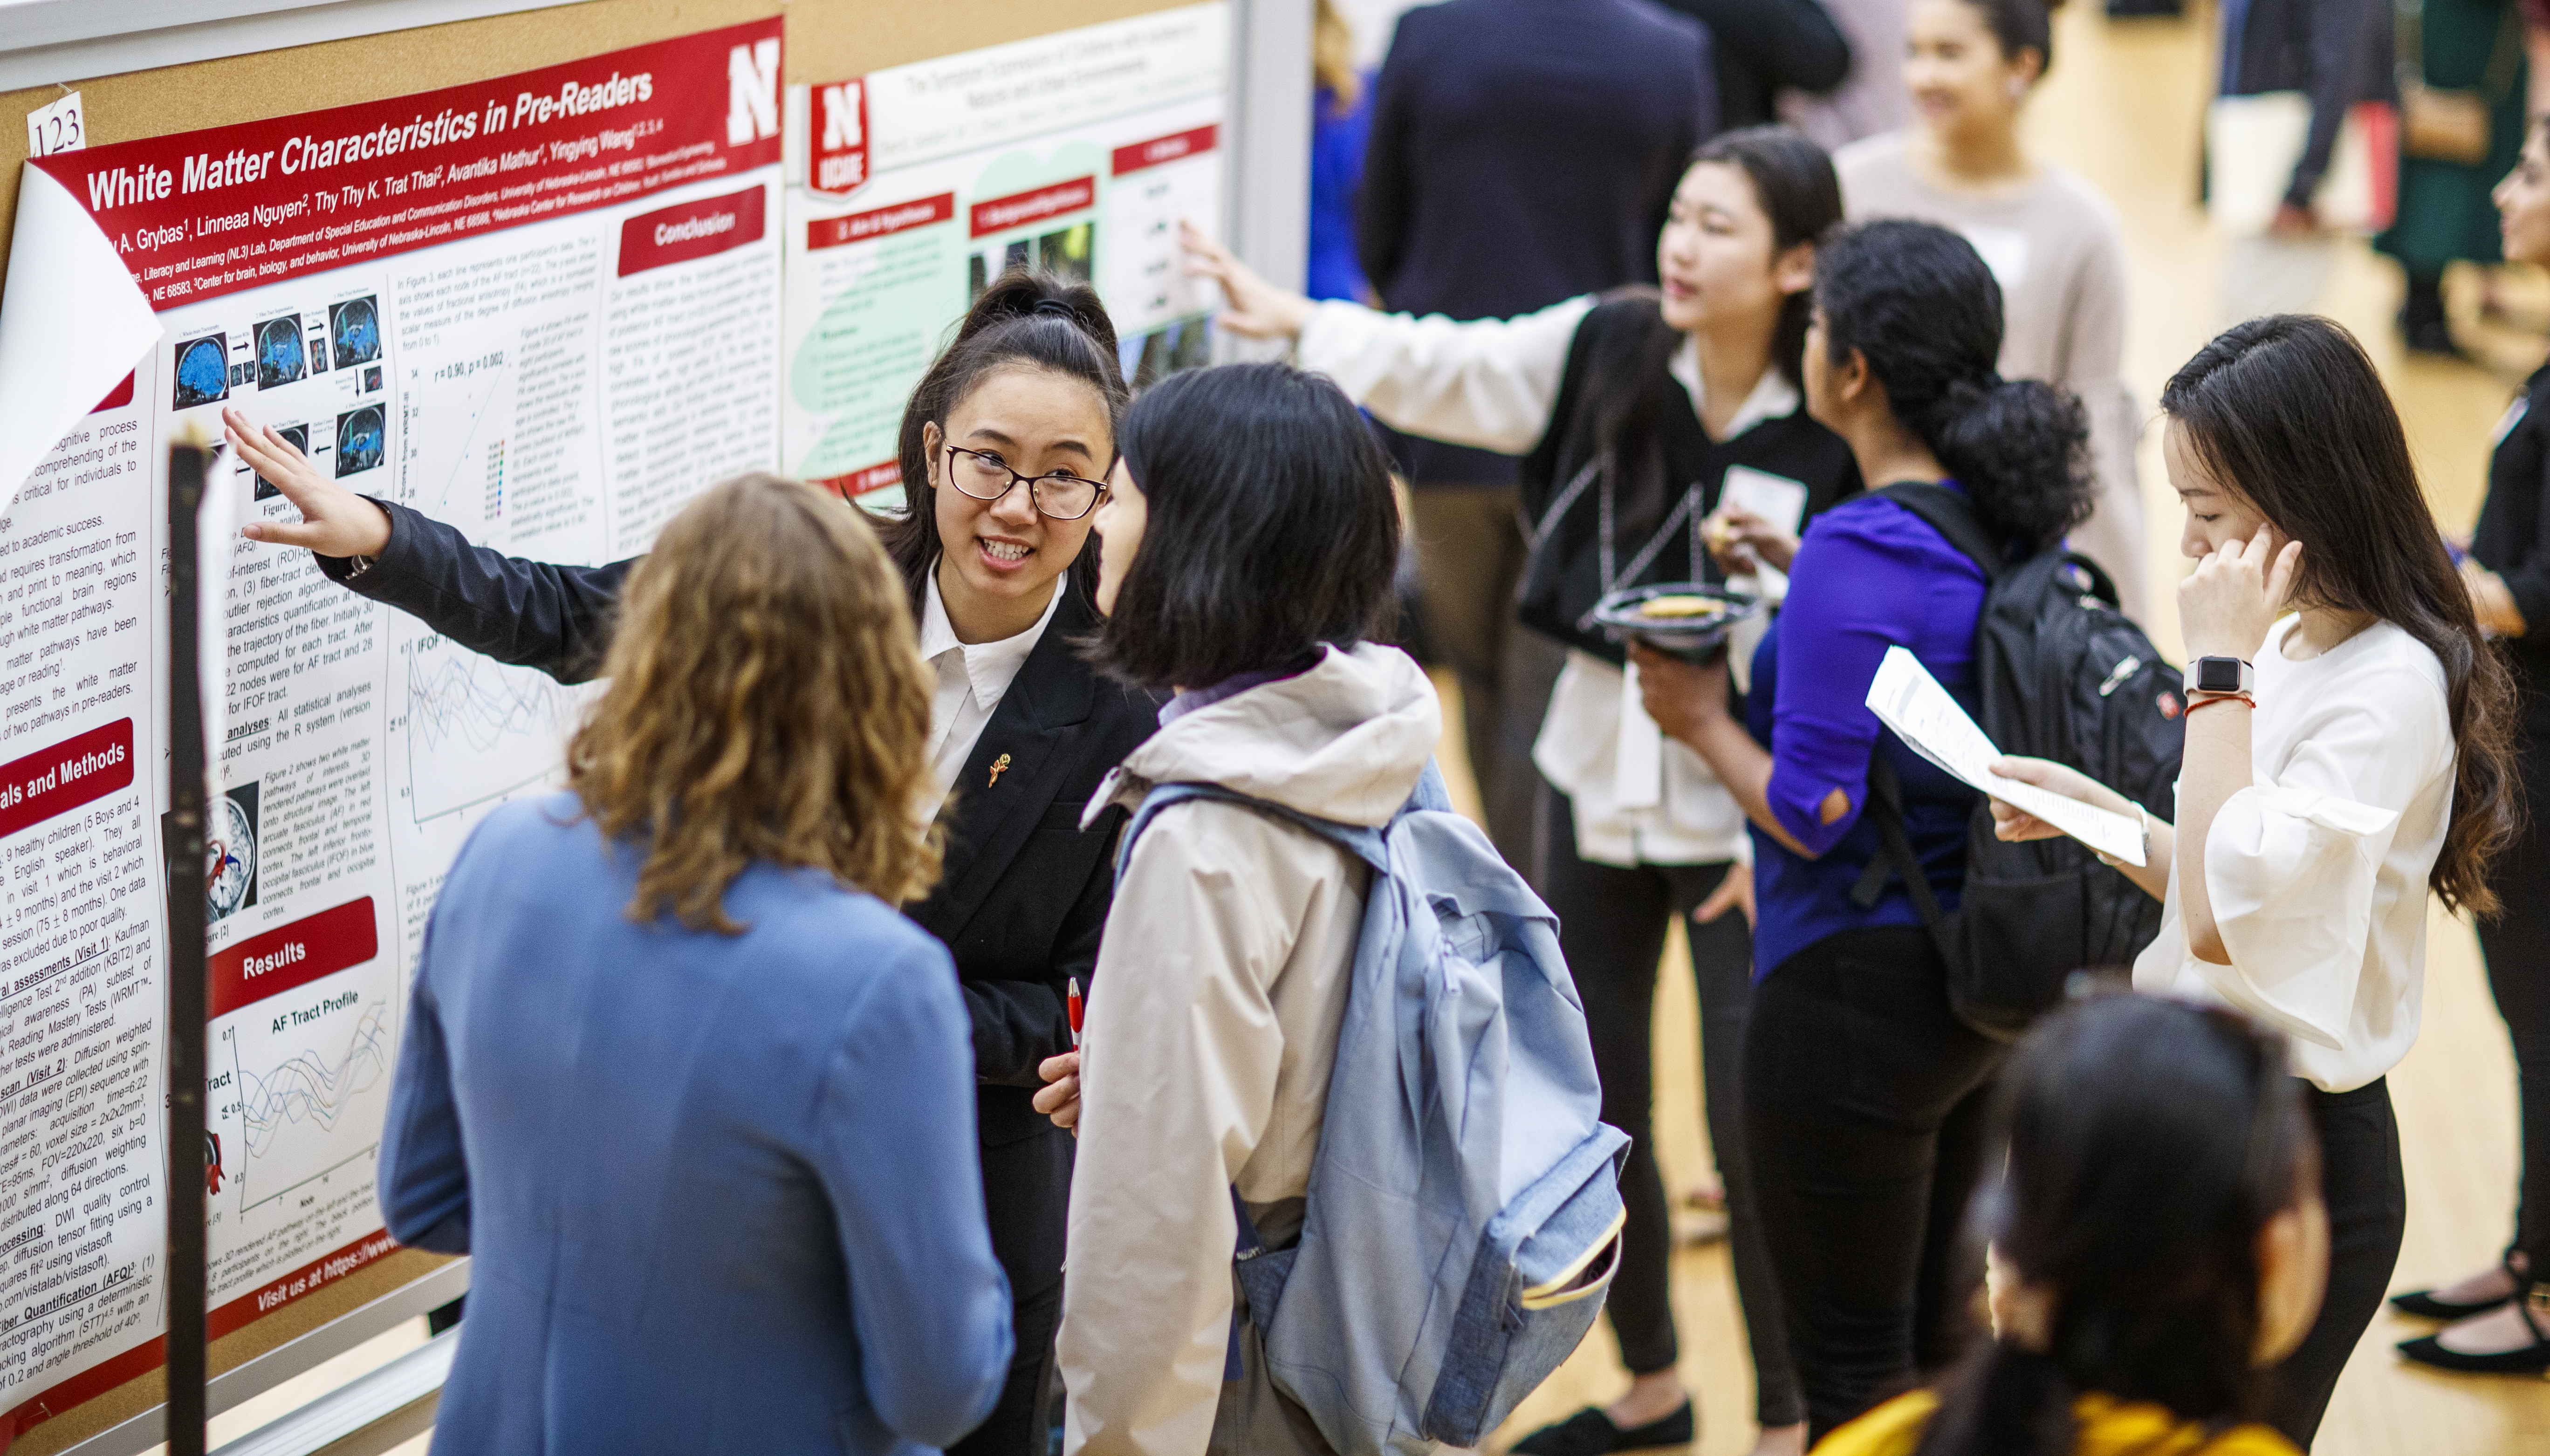 Undergraduate students present their research and creative activities projects at the 2019 Spring Research Fair